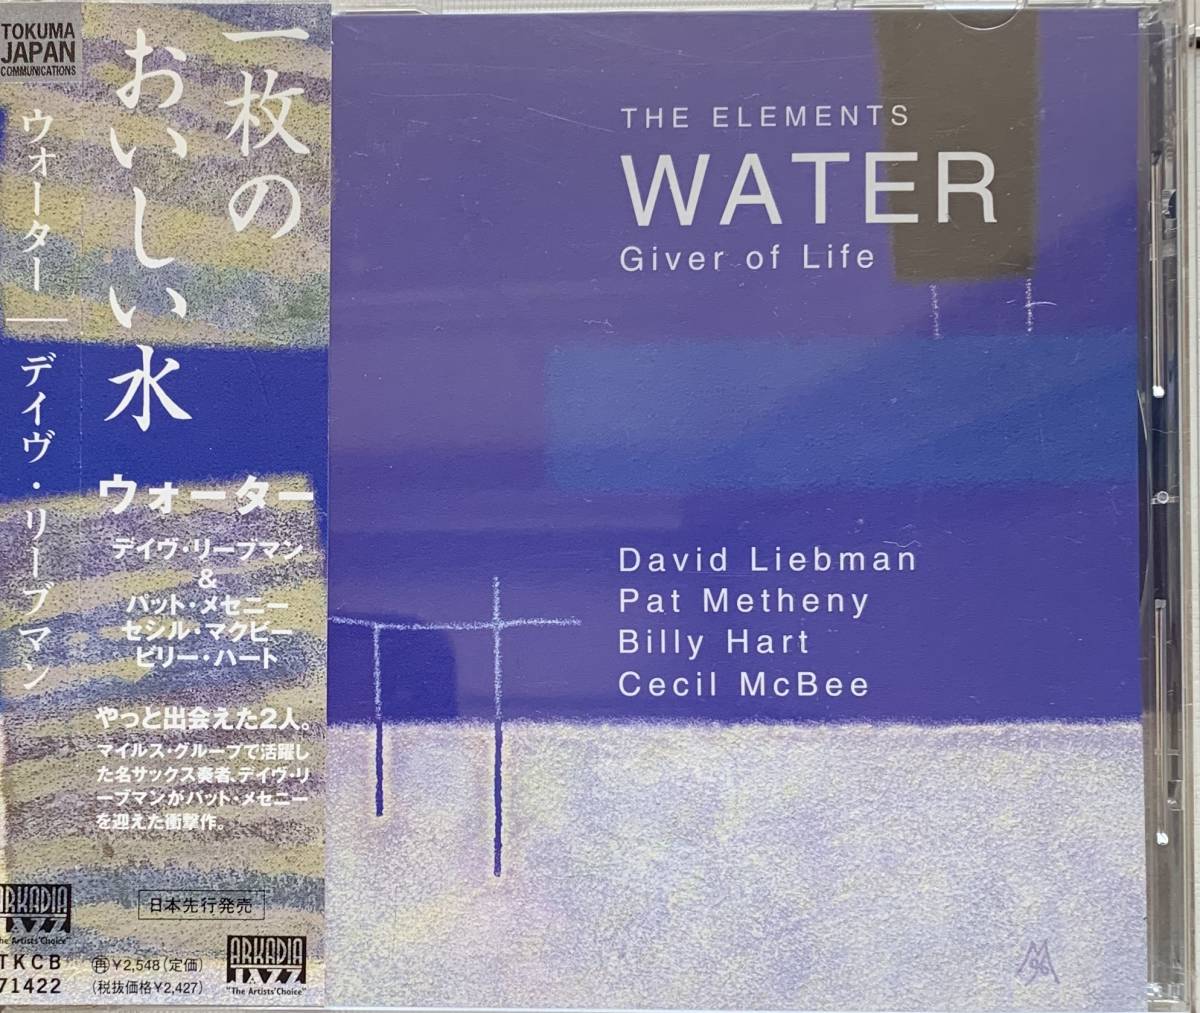 DAVID LIEBMAN PAT METHENY The ELEMENTS WATER GIVER OF LIFE ウォーター　デイブ・リーブマン　パット・メセニー_画像1